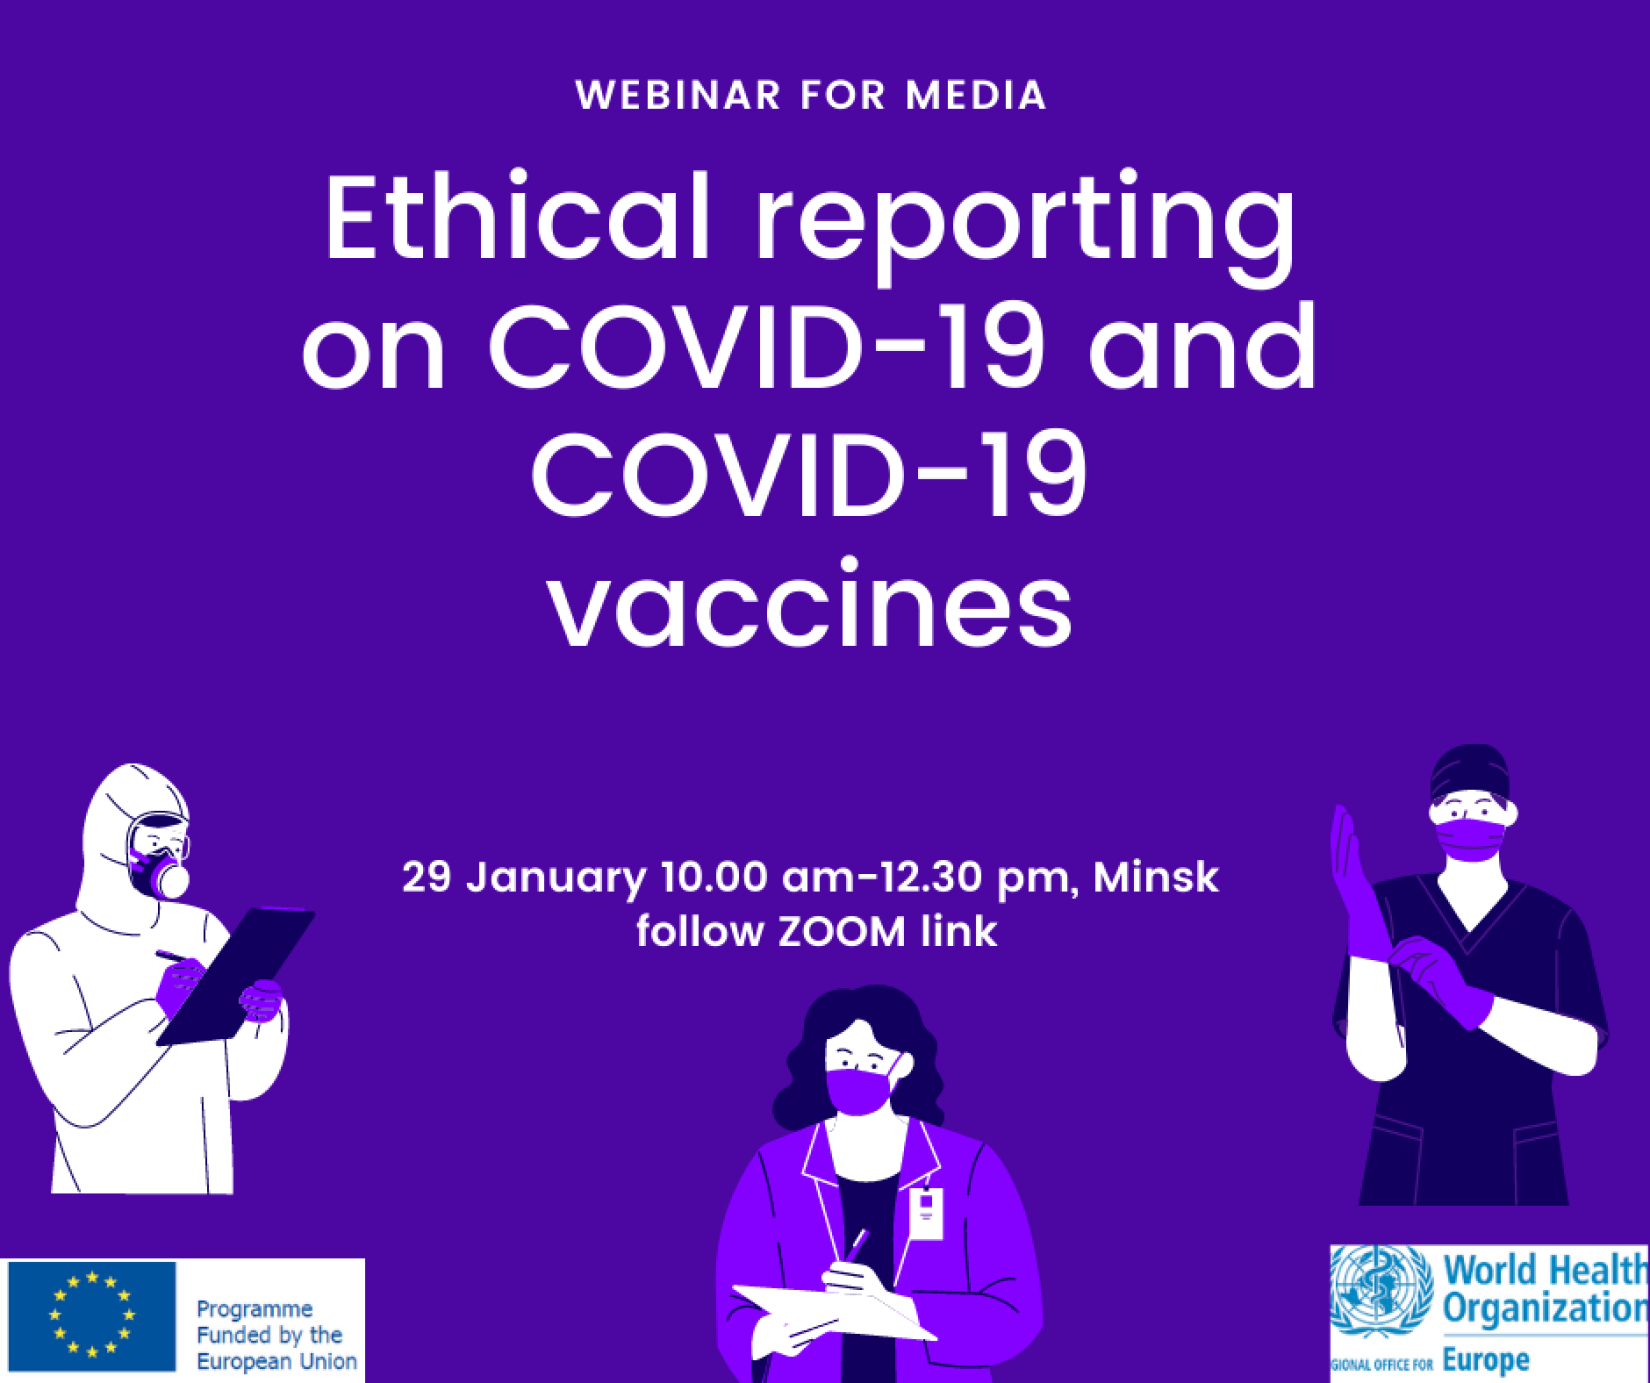 COVID-19 & Media: WHO Regulations and Current Developments 